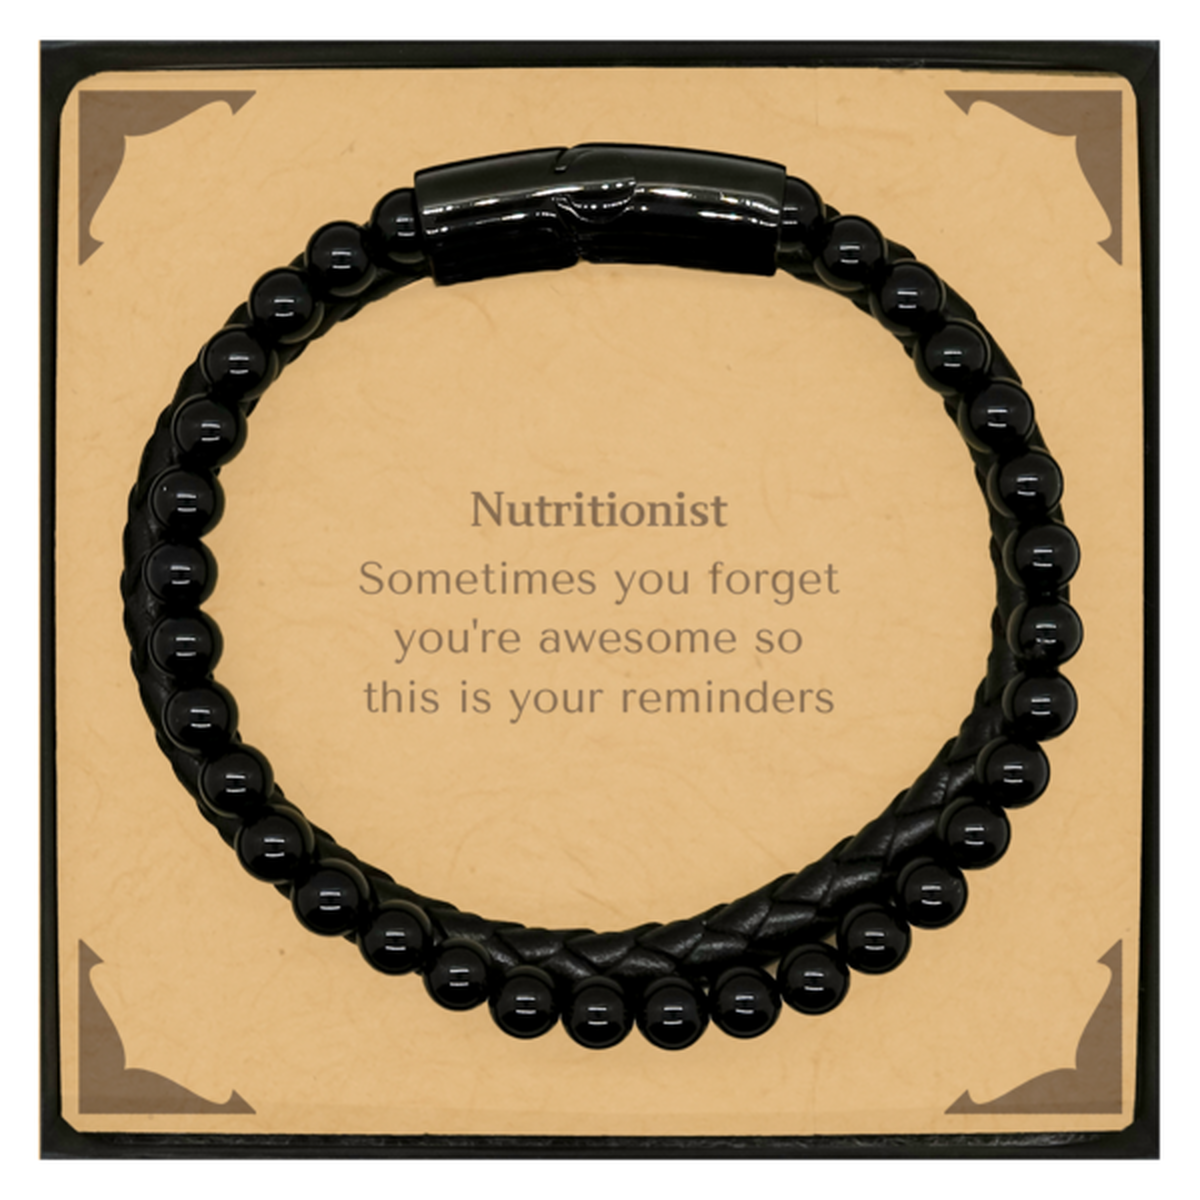 Sentimental Nutritionist Stone Leather Bracelets, Nutritionist Sometimes you forget you're awesome so this is your reminders, Graduation Christmas Birthday Gifts for Nutritionist, Men, Women, Coworkers